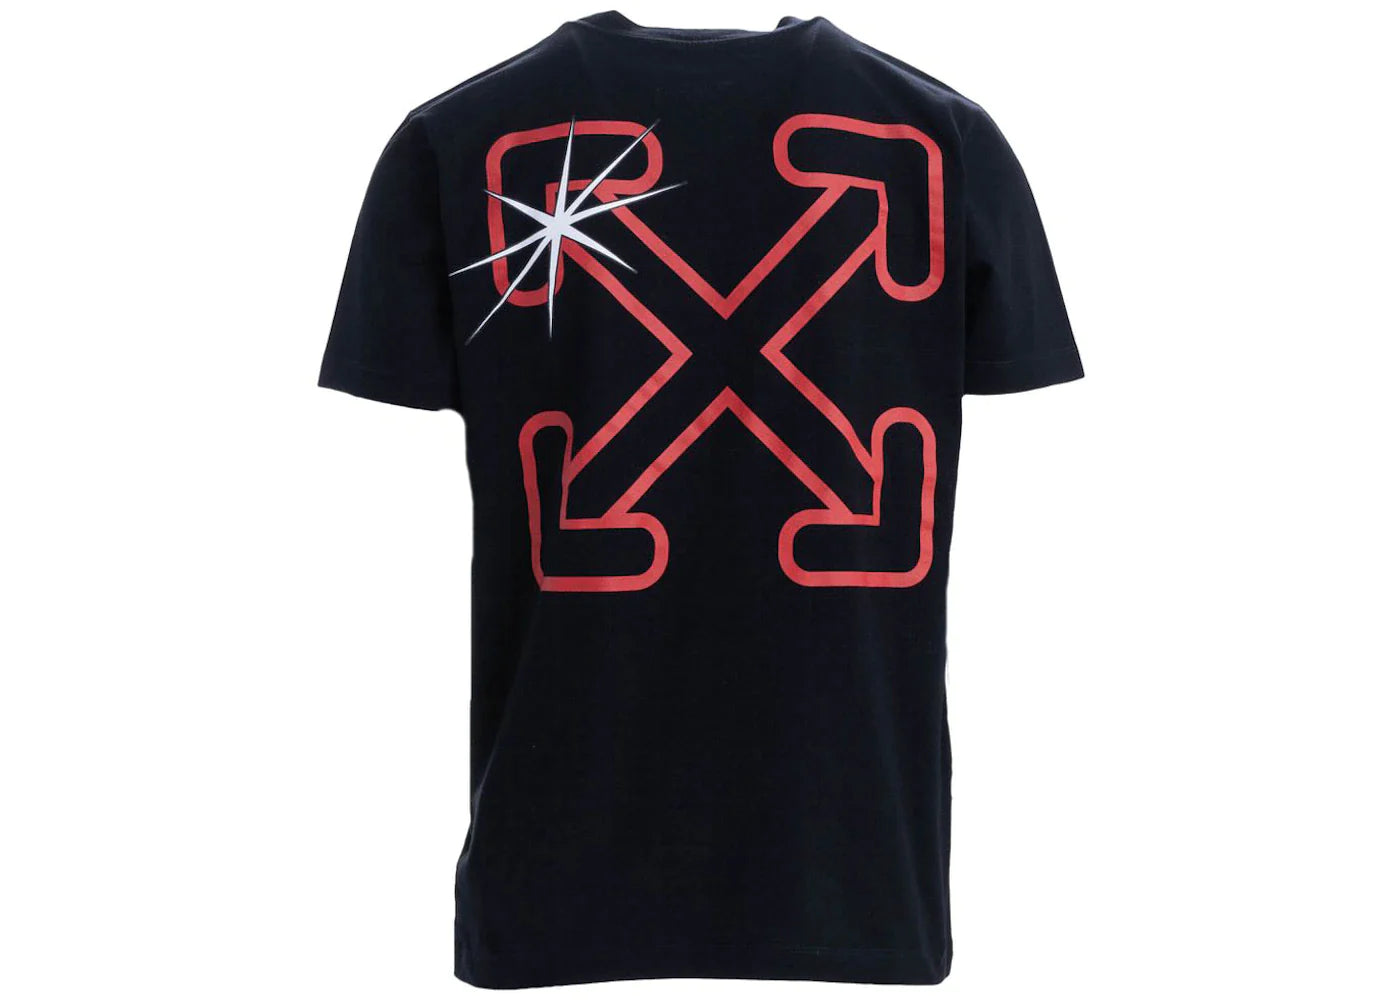 Off-White Starred Arrow T-Shirt Black Red